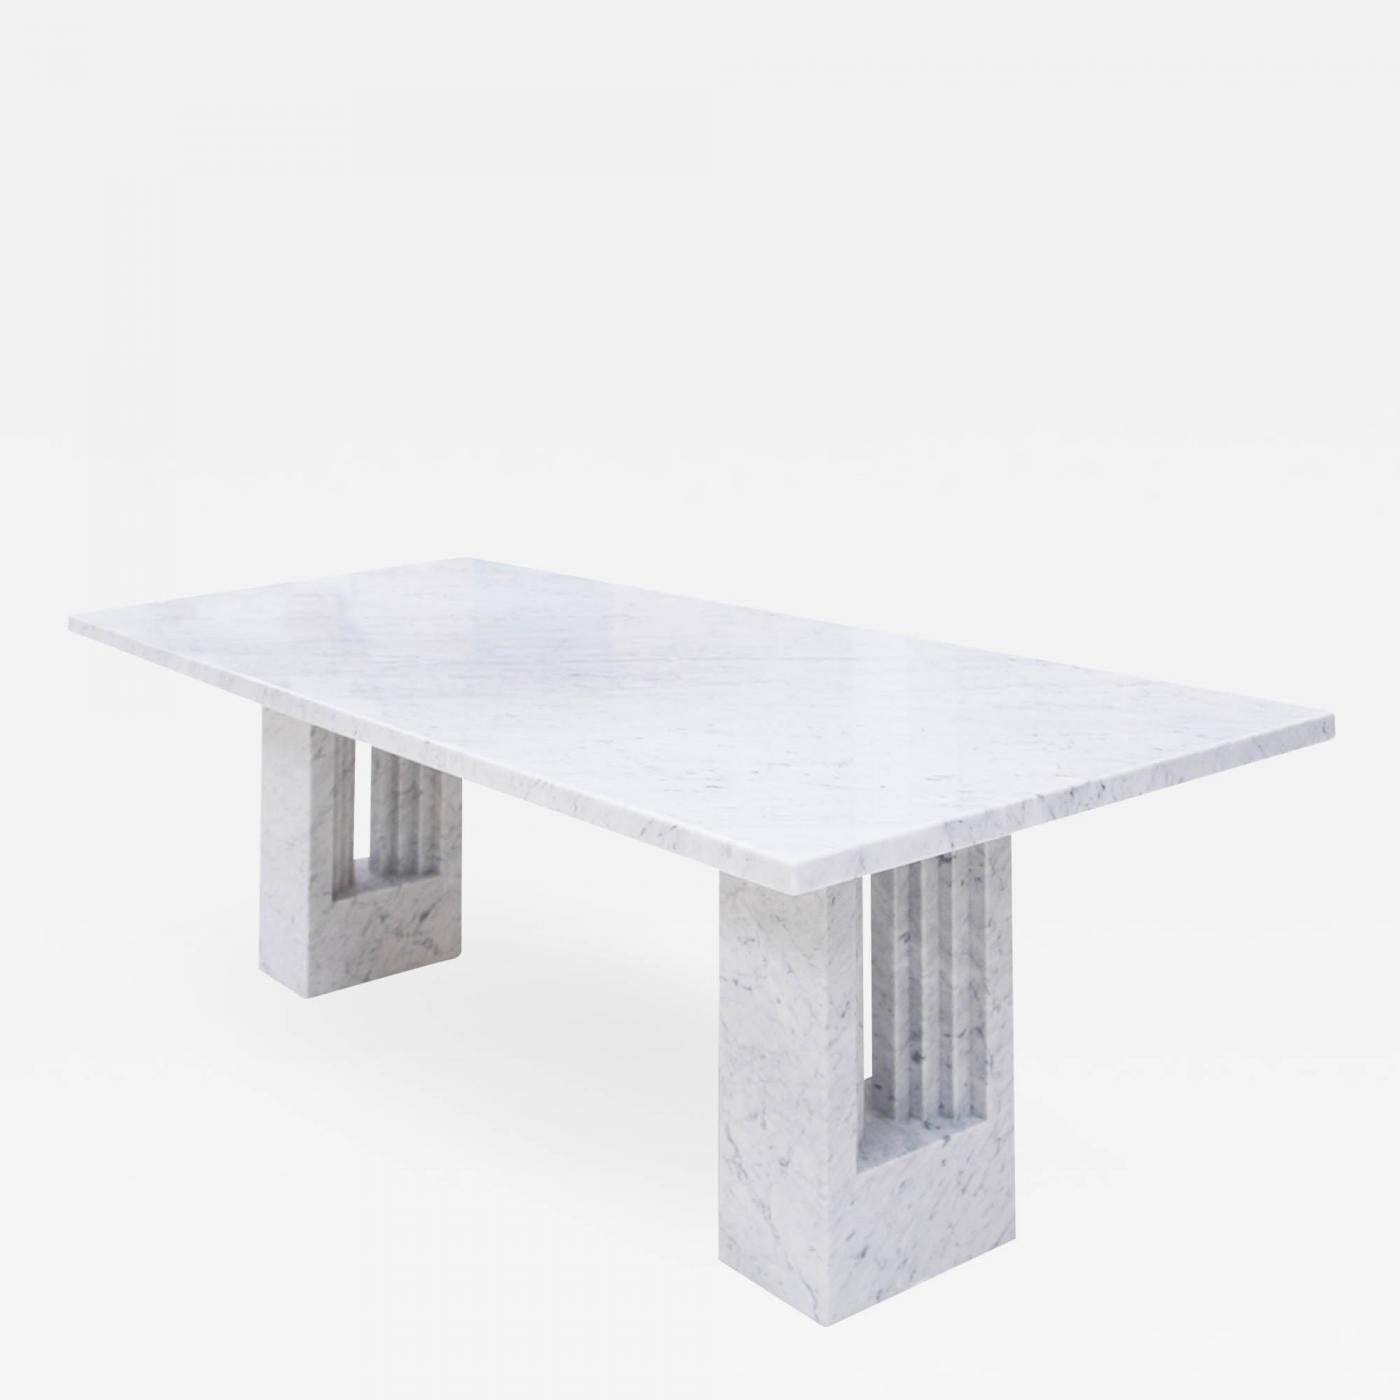 The Delfi table is a redesign of a rationalist table model from the 1930s, designed by Marcel Breuer for Simon Gavina, on which Carlo Scarpa made some variations in 1968, on the request of Gavina. This model has remained unchanged to date.

The